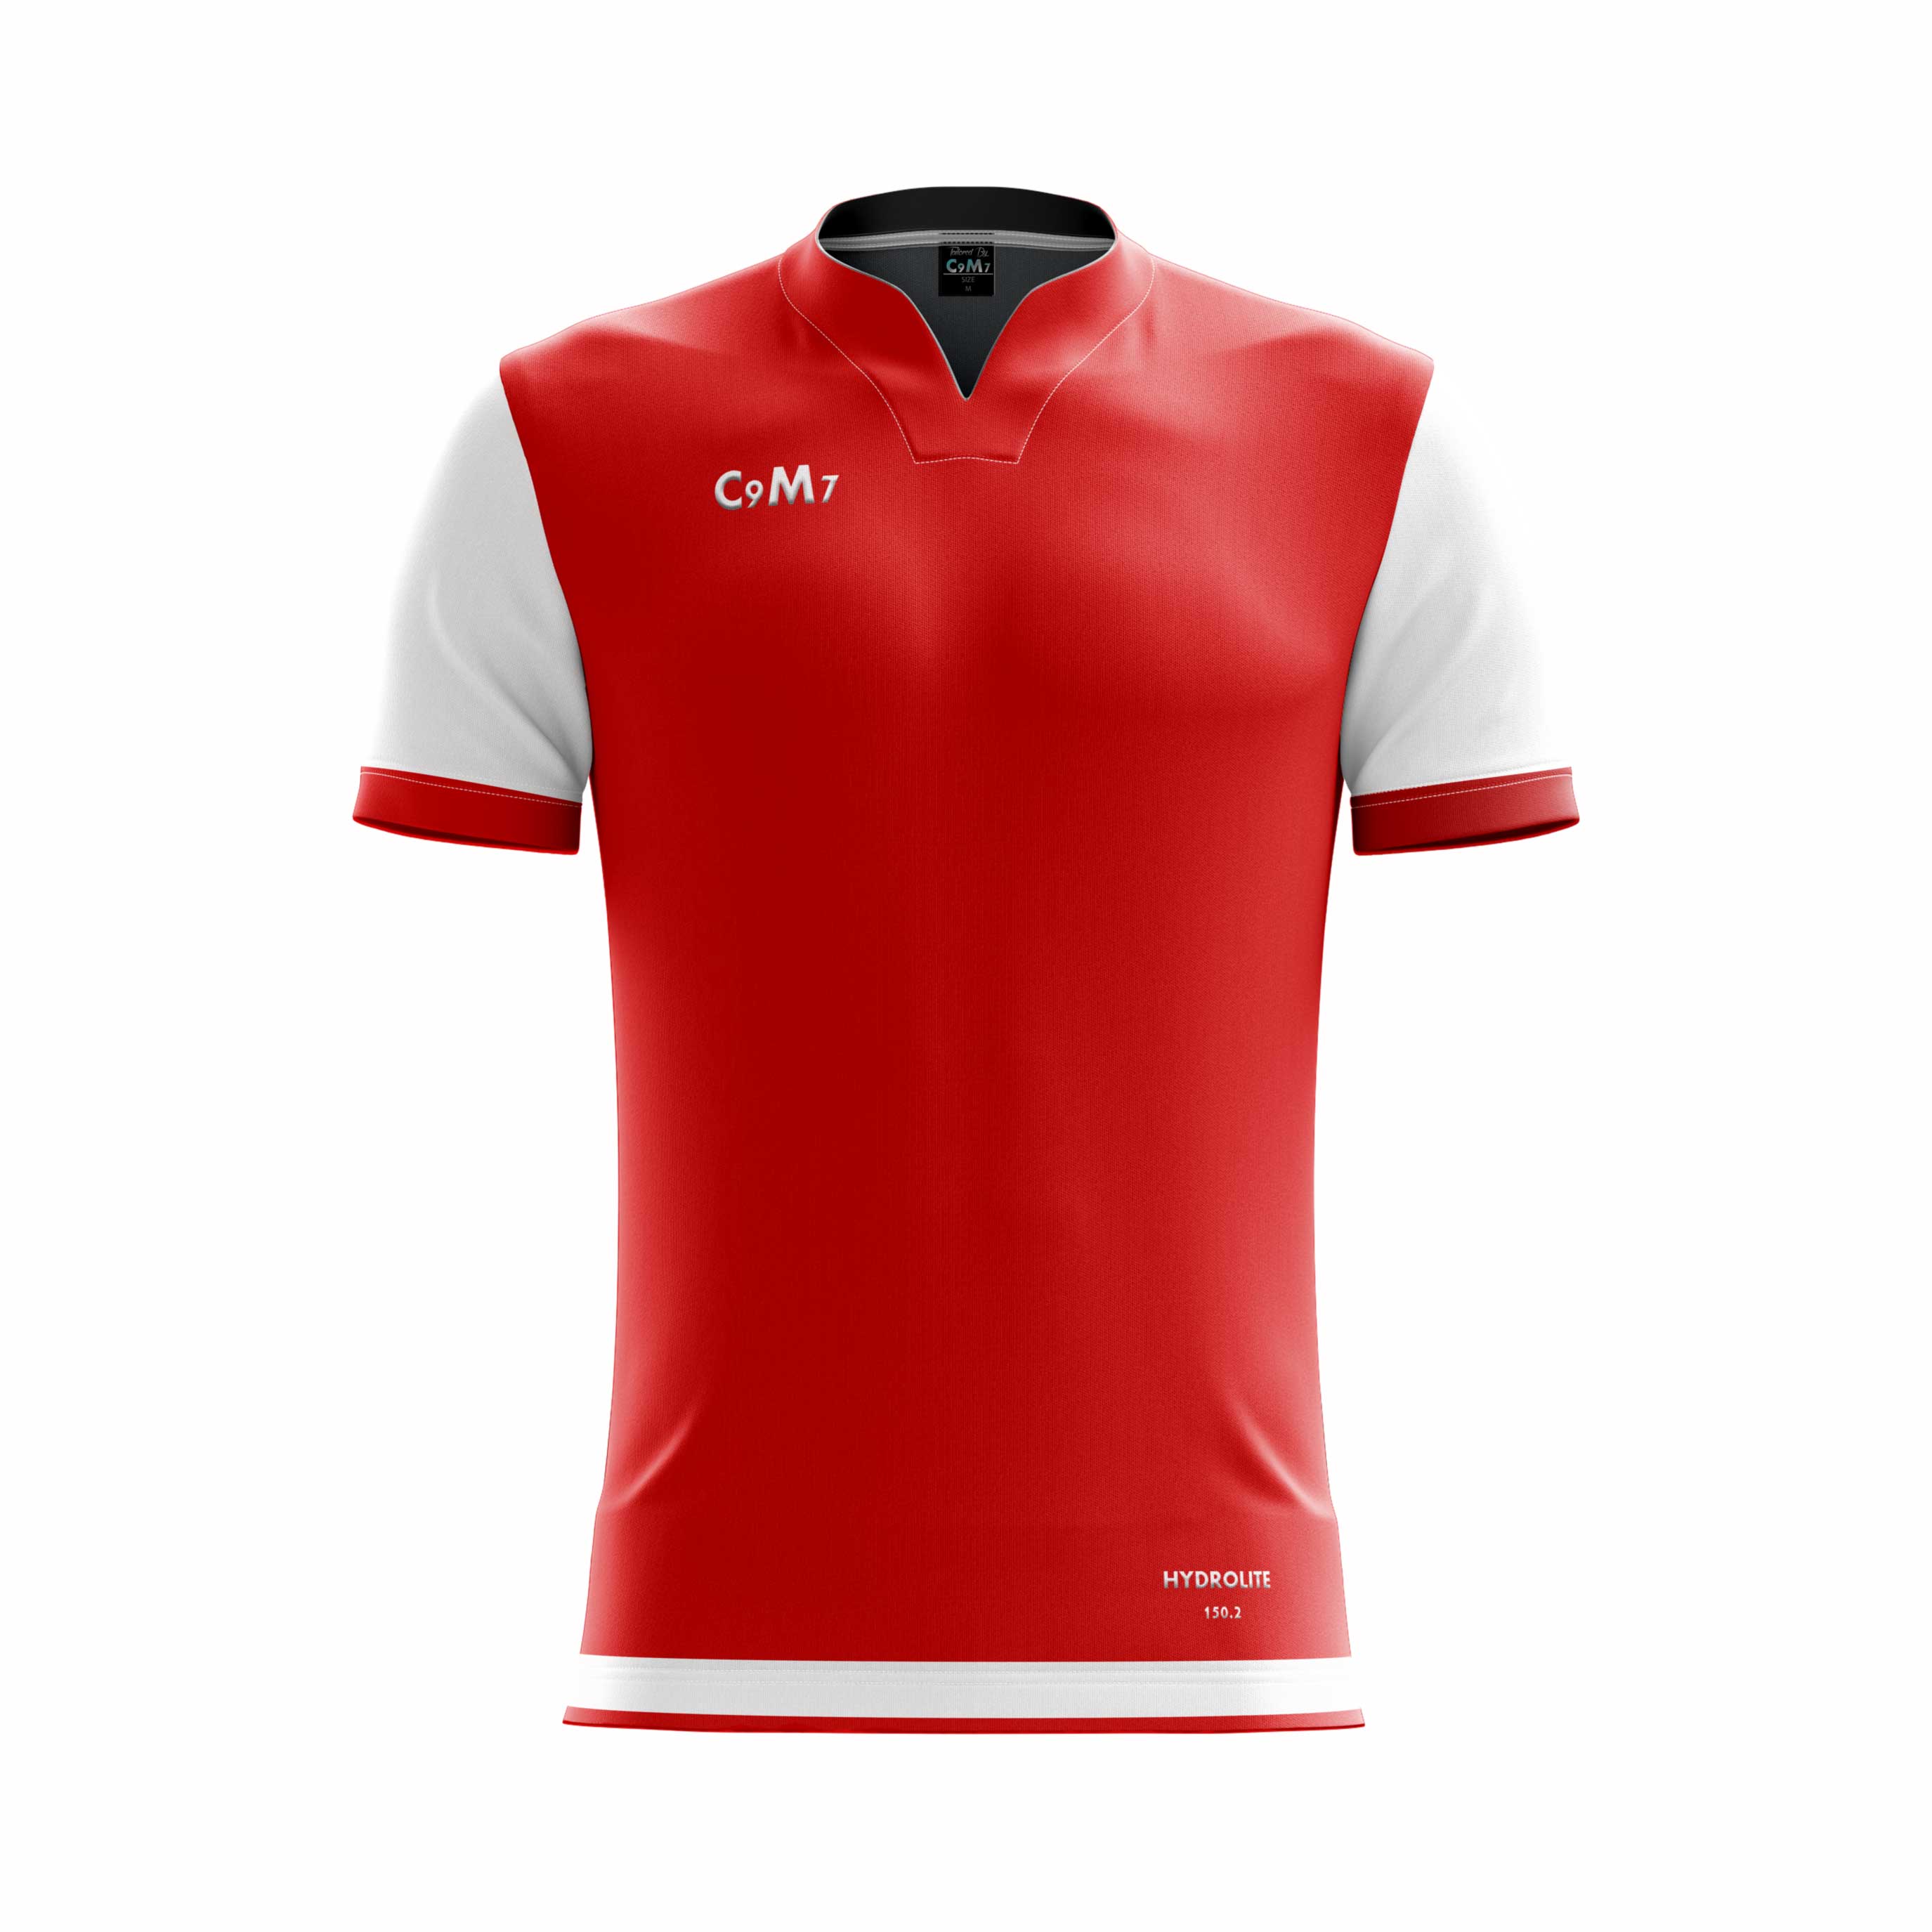 red colour jersey